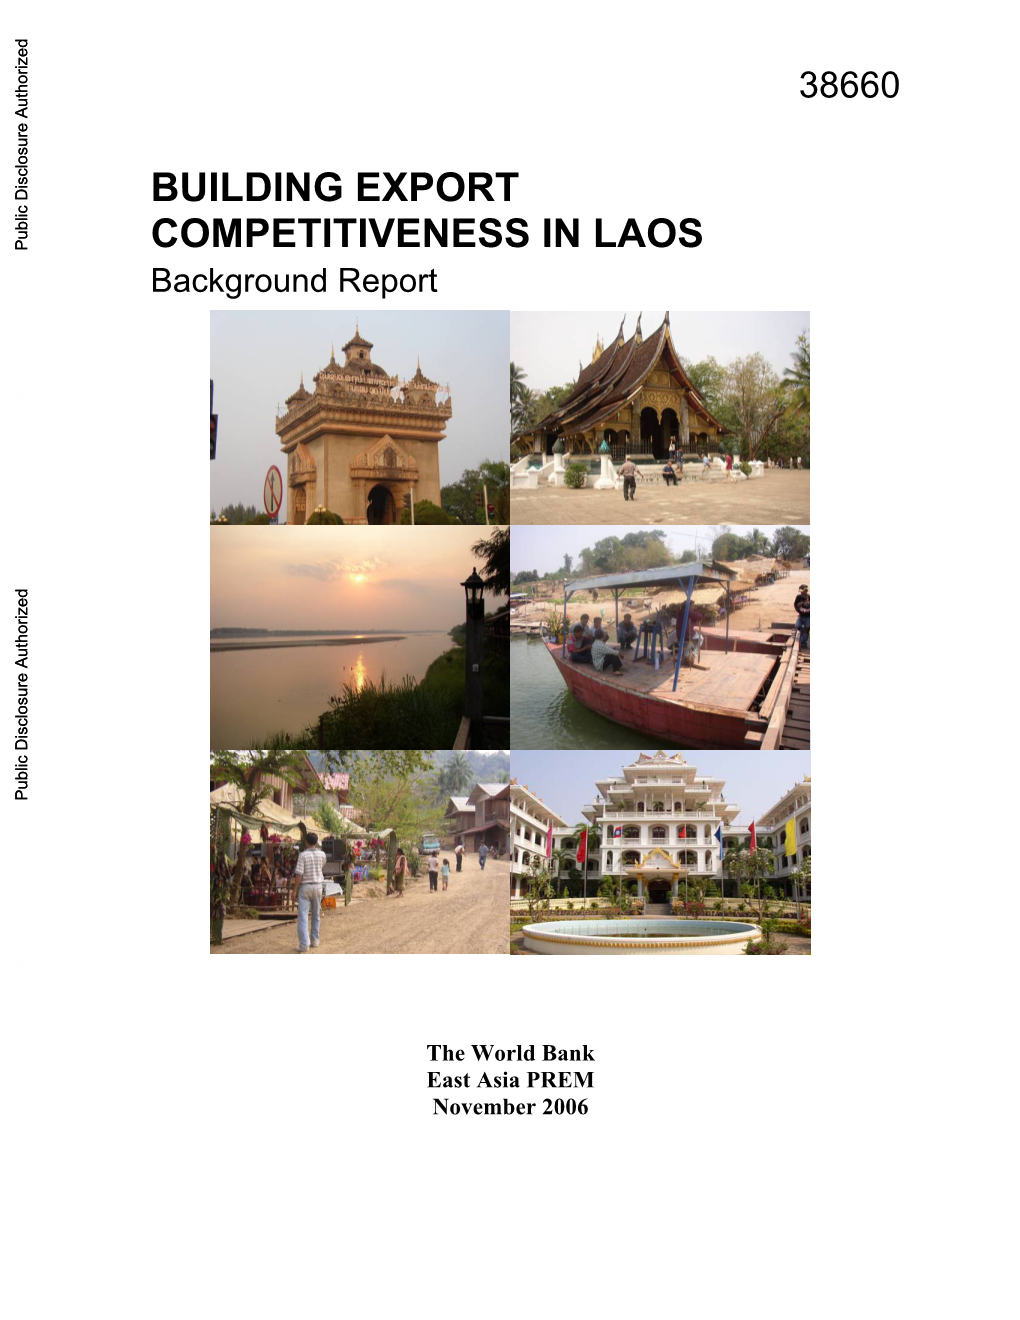 Building Export Competitiveness in Laos